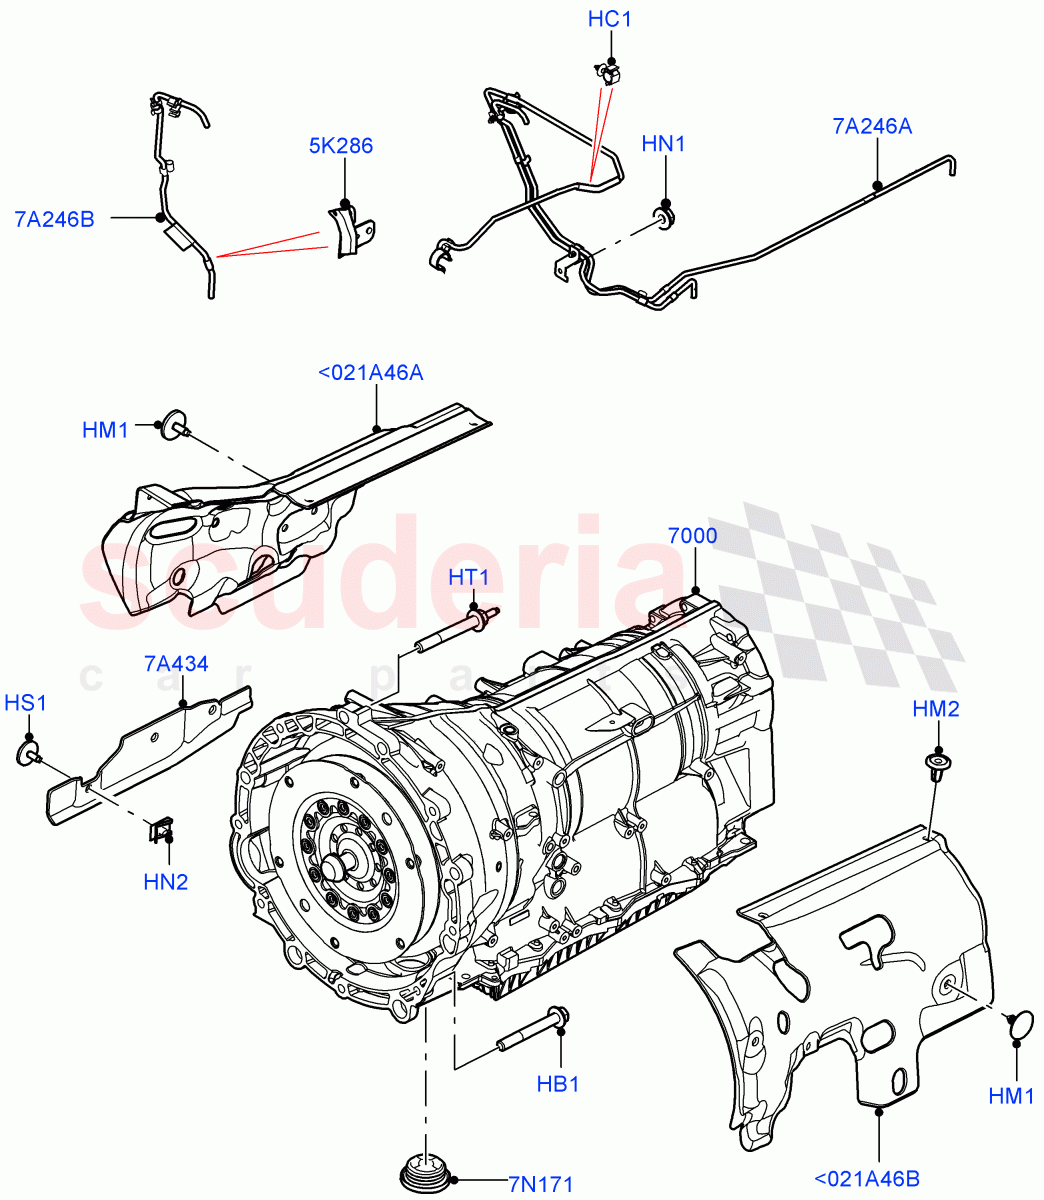 Auto Trans Assy & Speedometer Drive(Nitra Plant Build)(3.0L AJ20D6 Diesel High,8 Speed Auto Trans ZF 8HP76)((V)FROMM2000001) of Land Rover Land Rover Defender (2020+) [3.0 I6 Turbo Diesel AJ20D6]